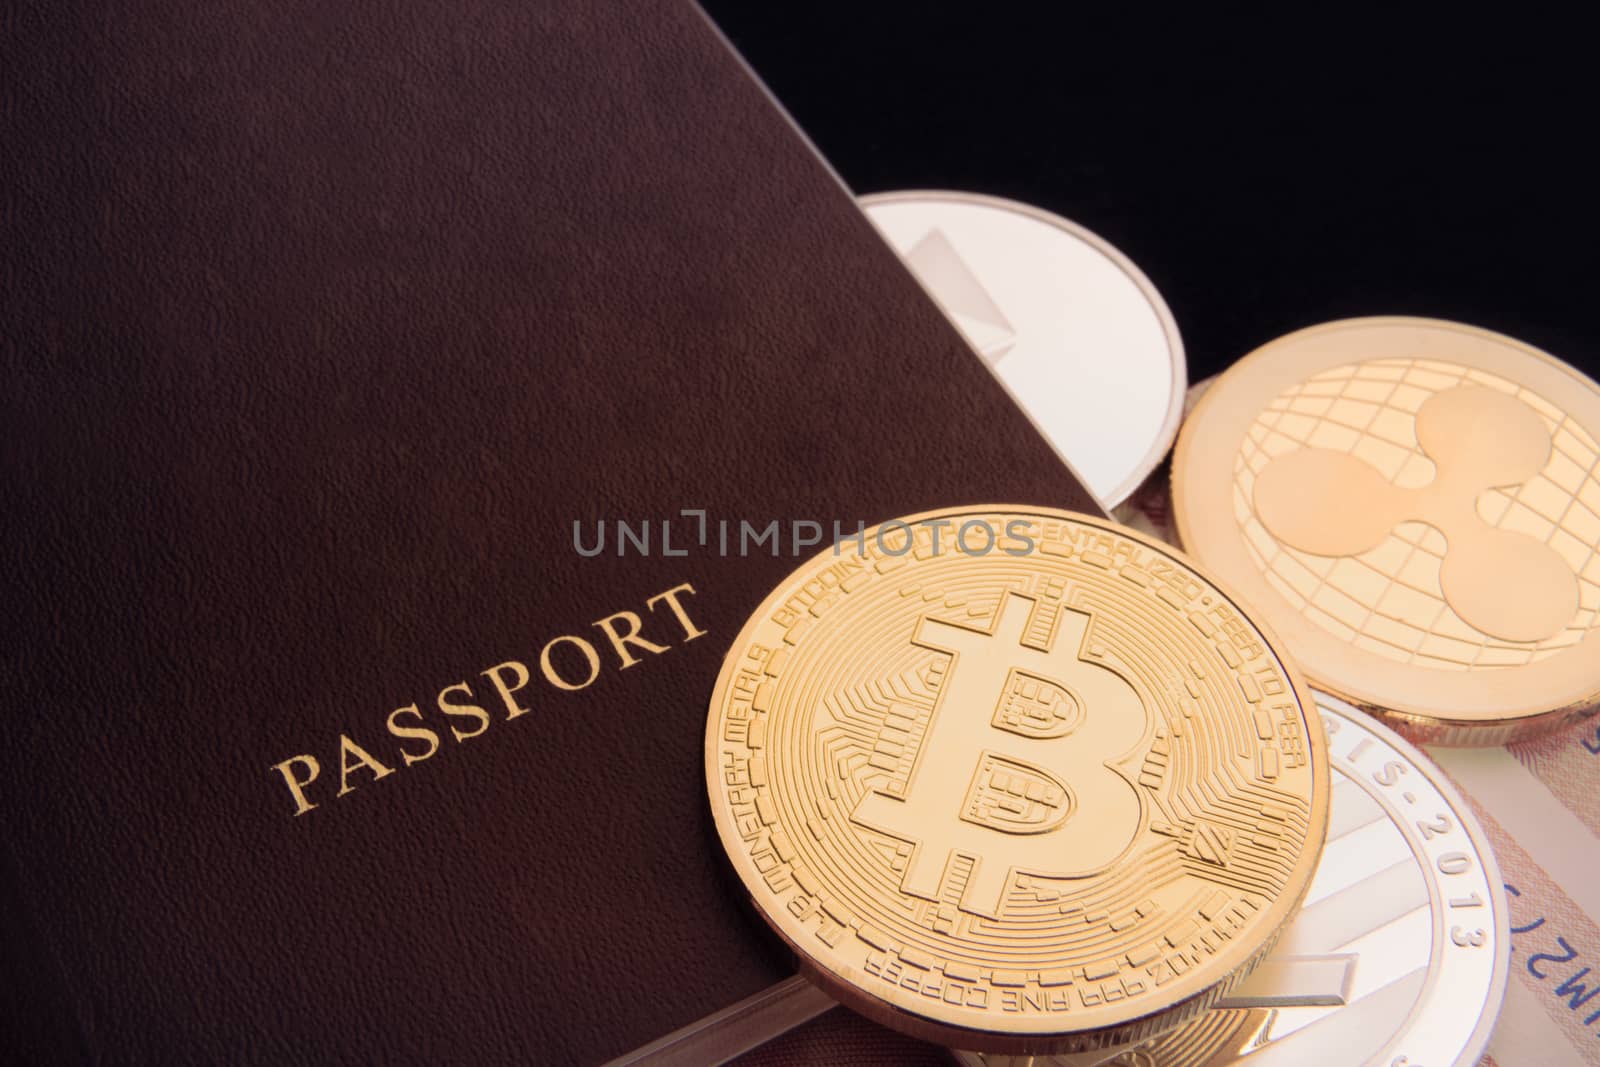 cryptocurrency bitcoin coin and passport, btc, bitcoin, ethereum, litecoins, internation trading business